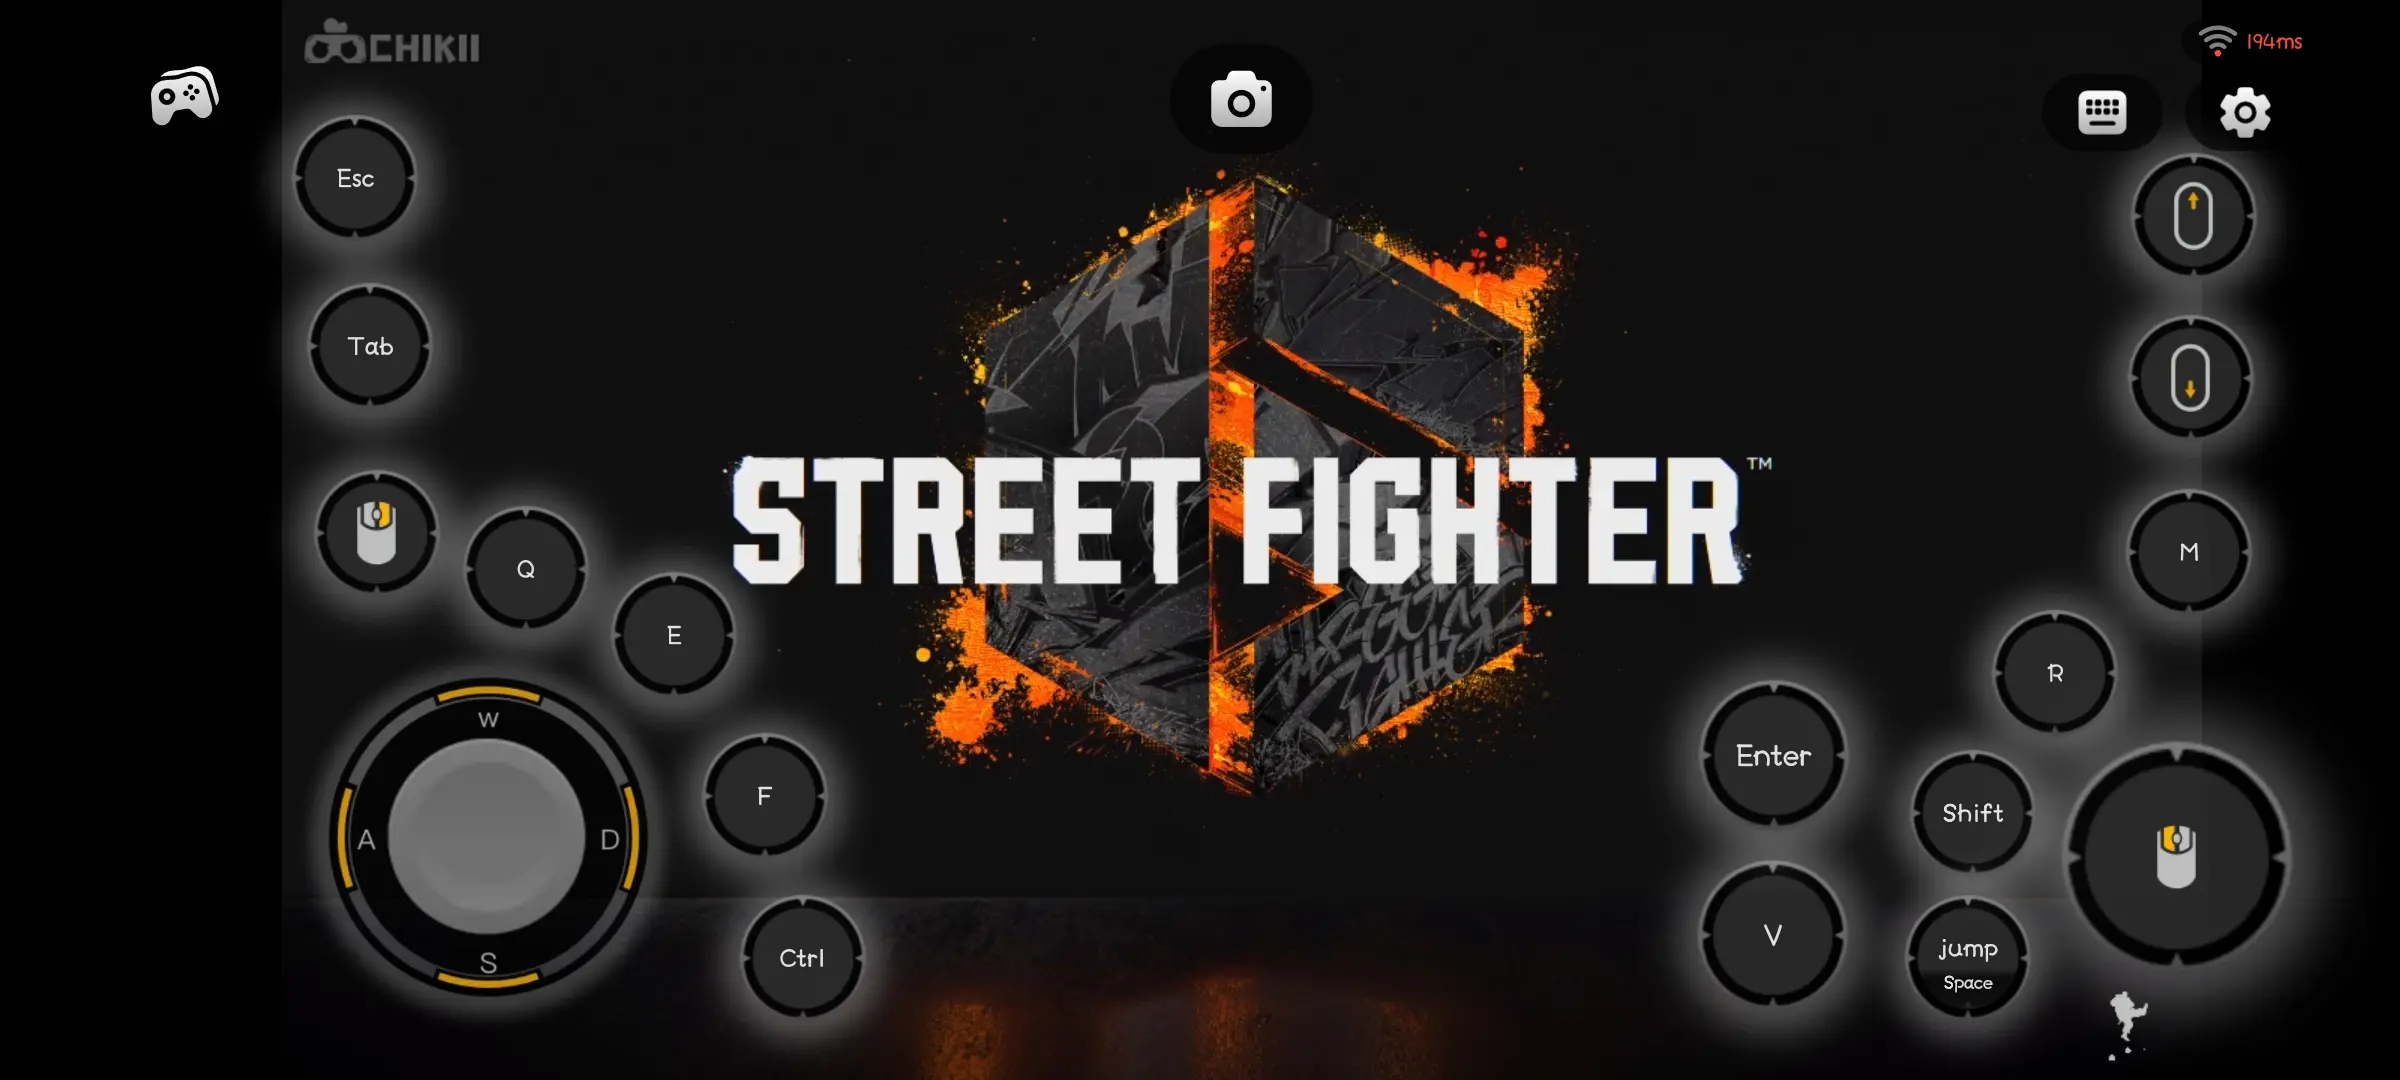 Street Fighter 6 android APK + data free download - Cloud gaming app Android - Chikii